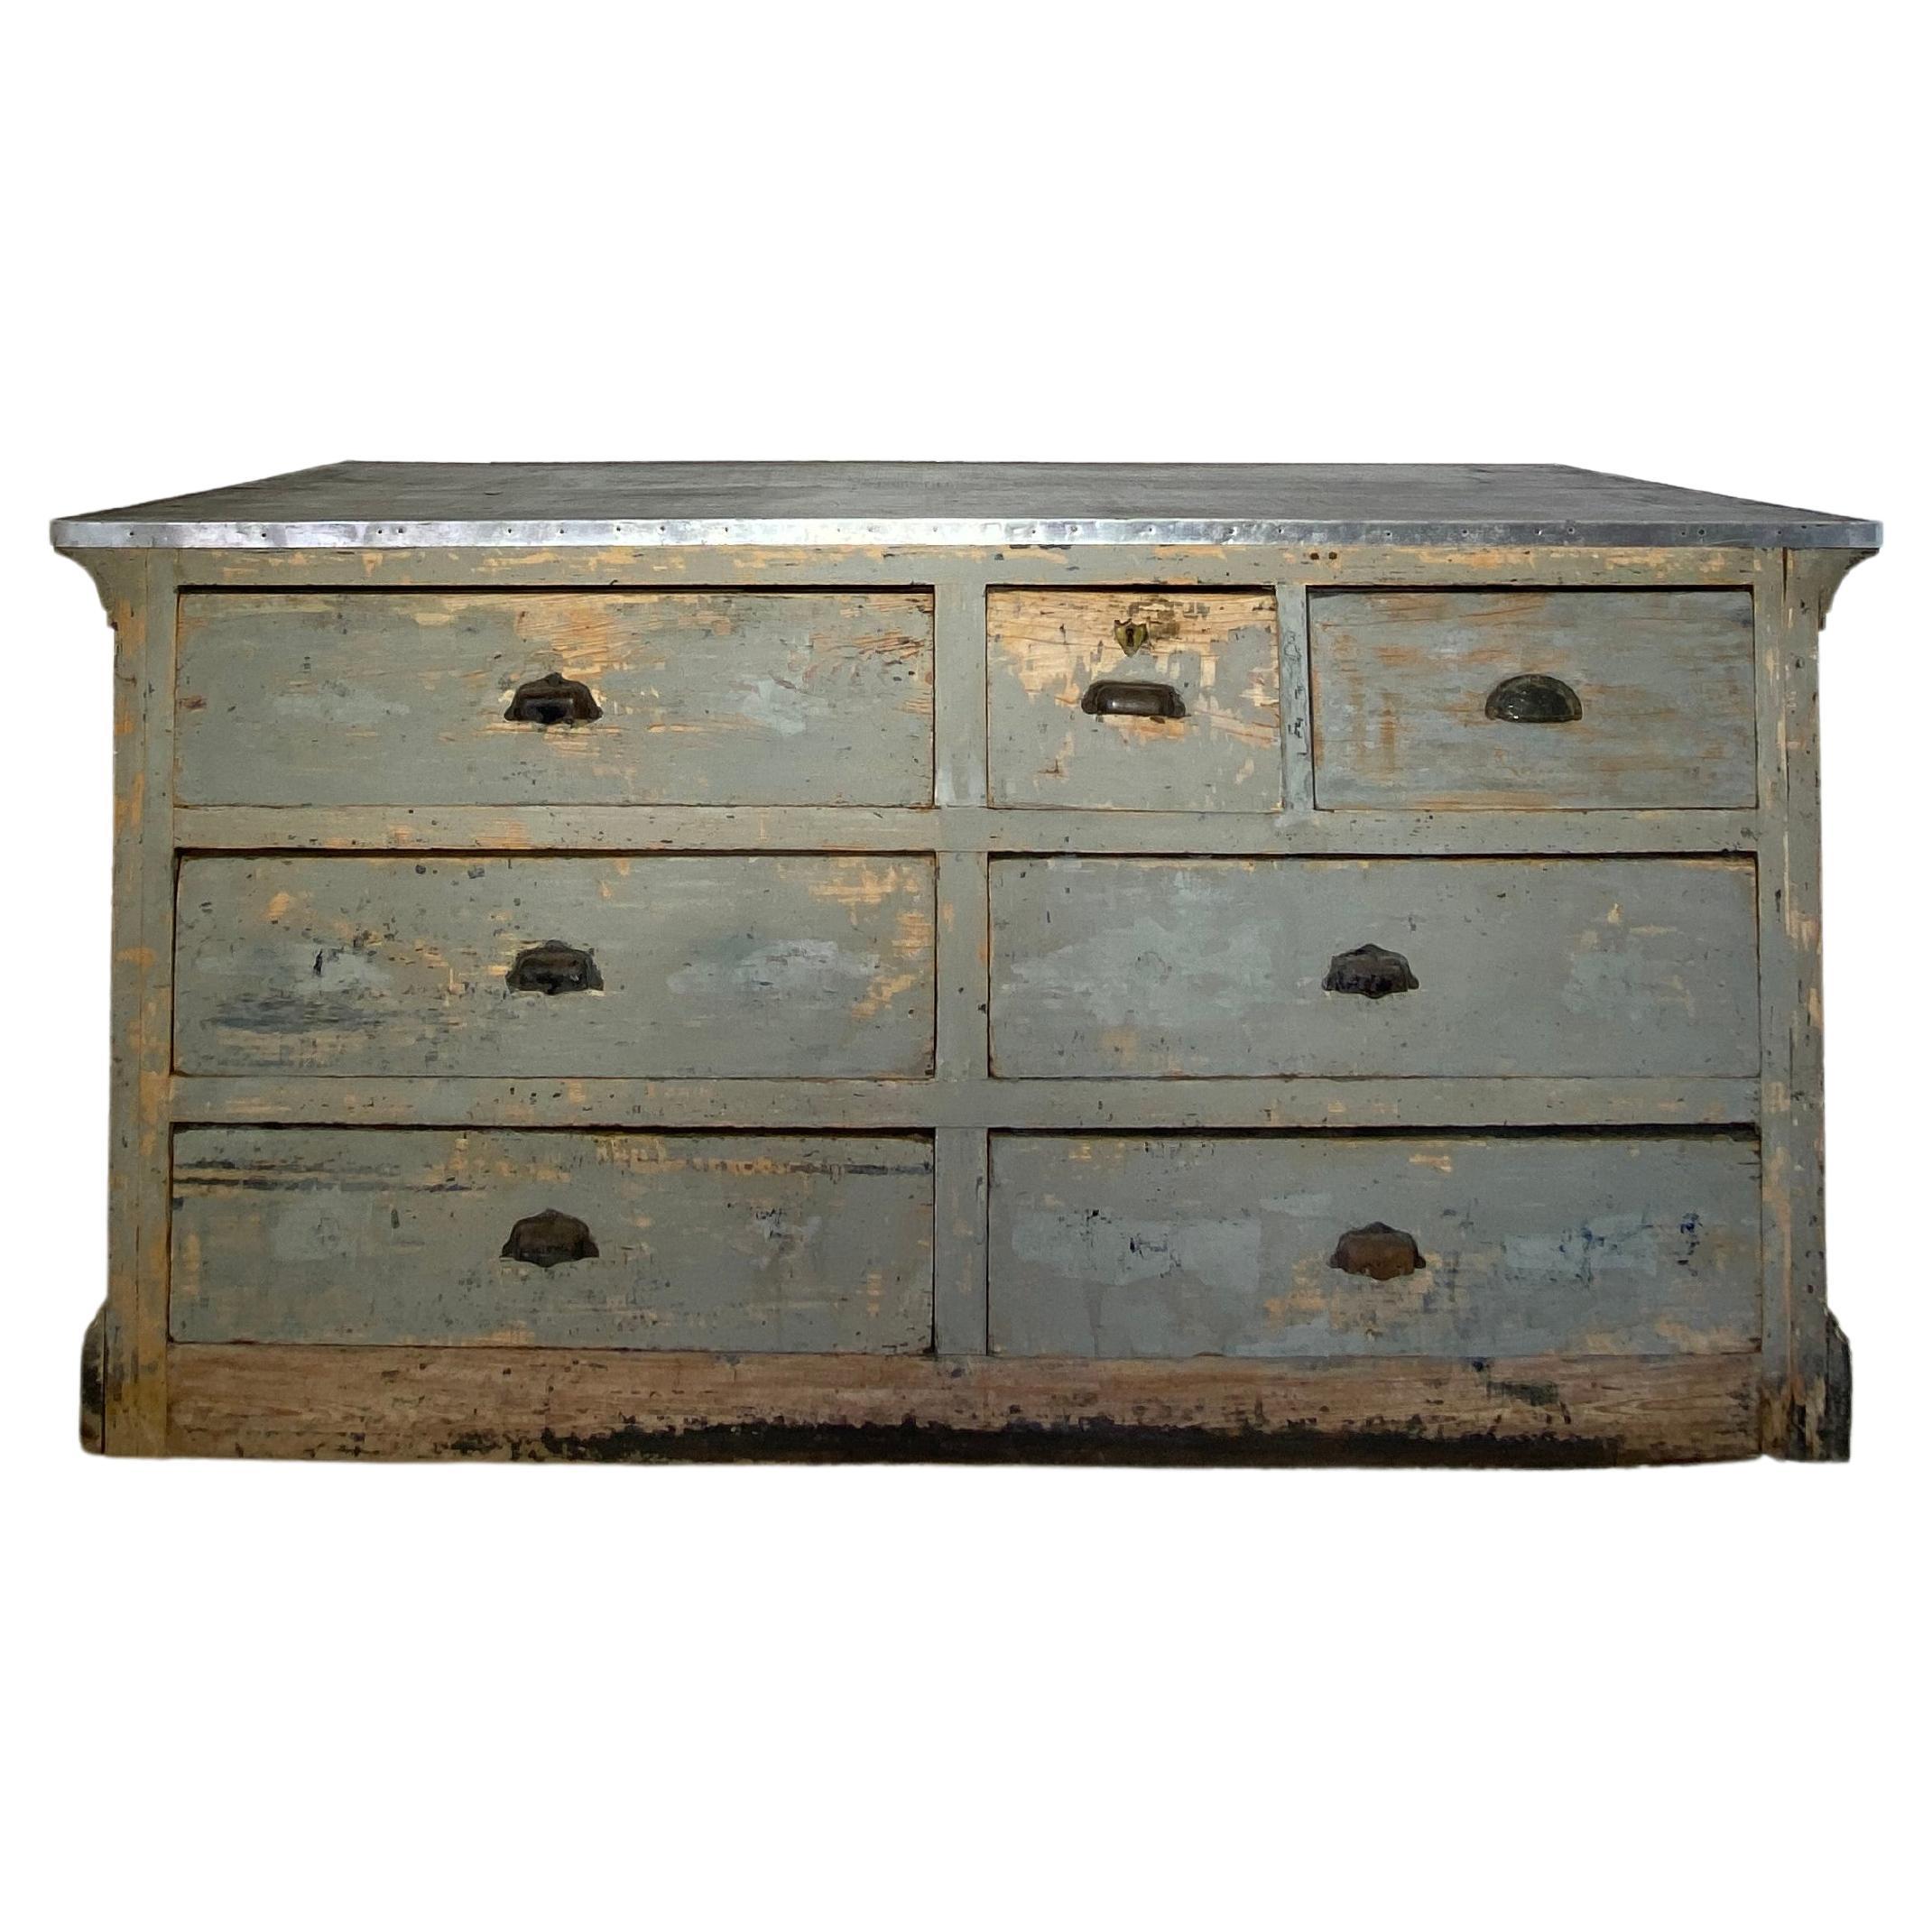 Early 19th Century Painted Store Counter For Sale